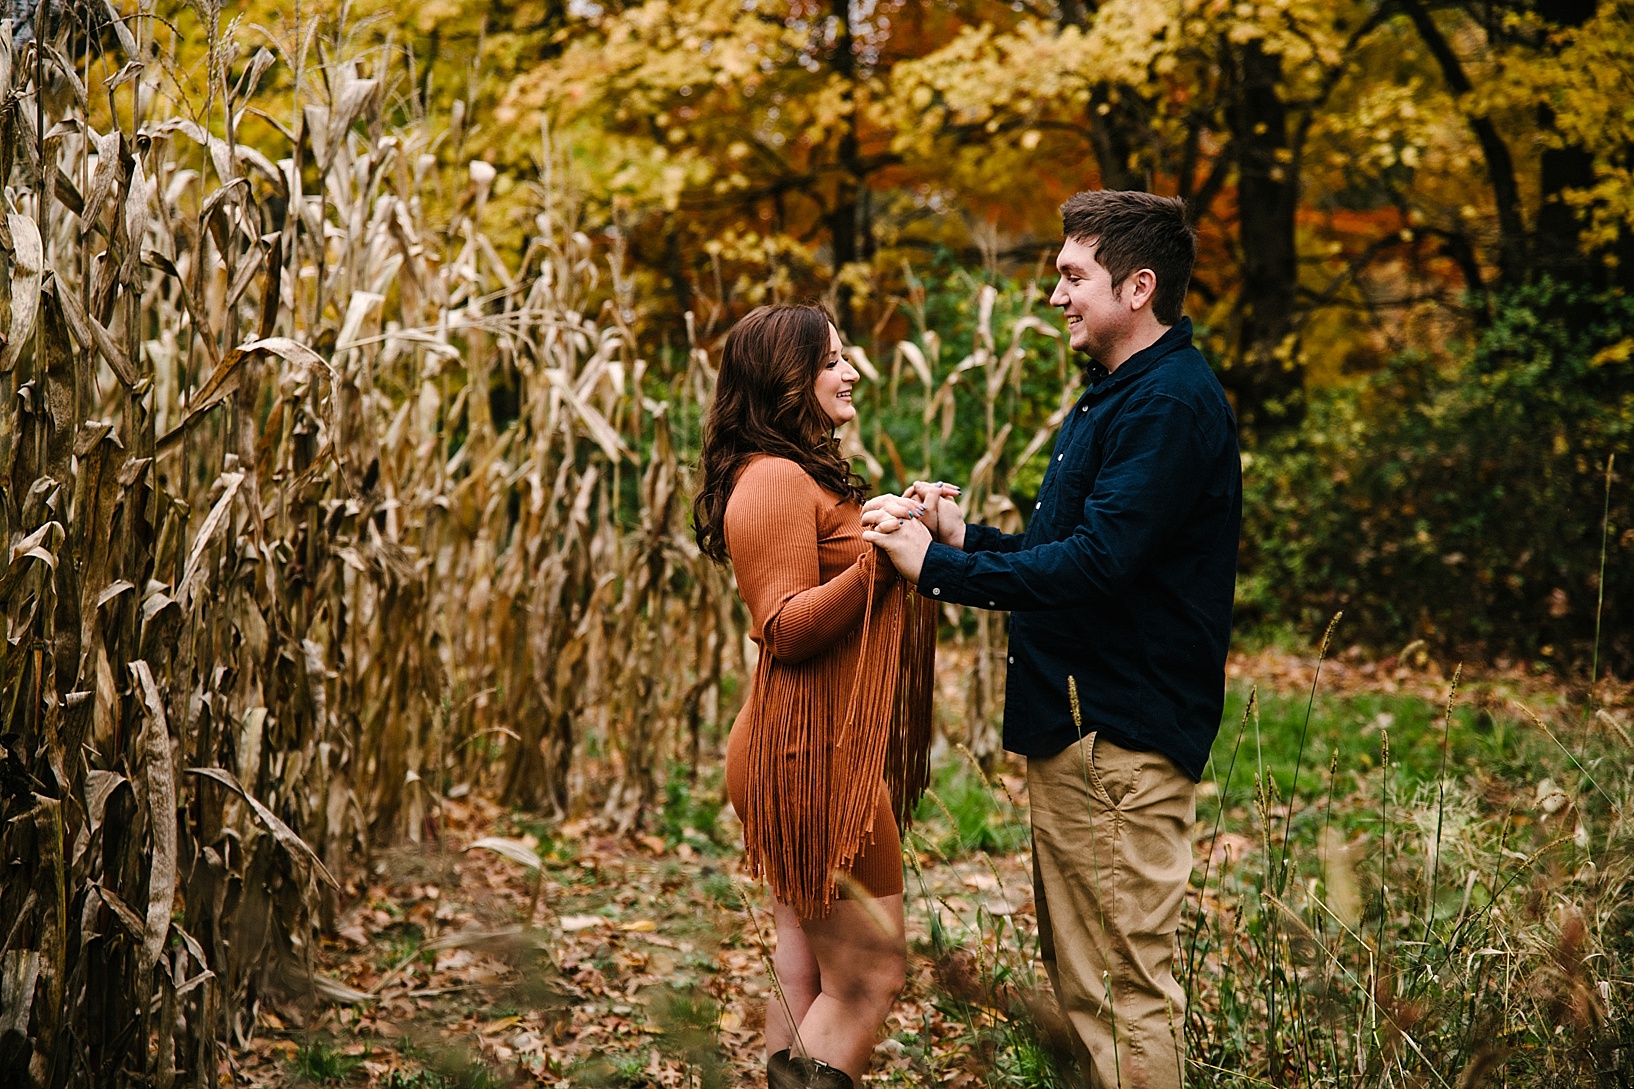 couple holding hands and smiling standing next to corn field in autumn